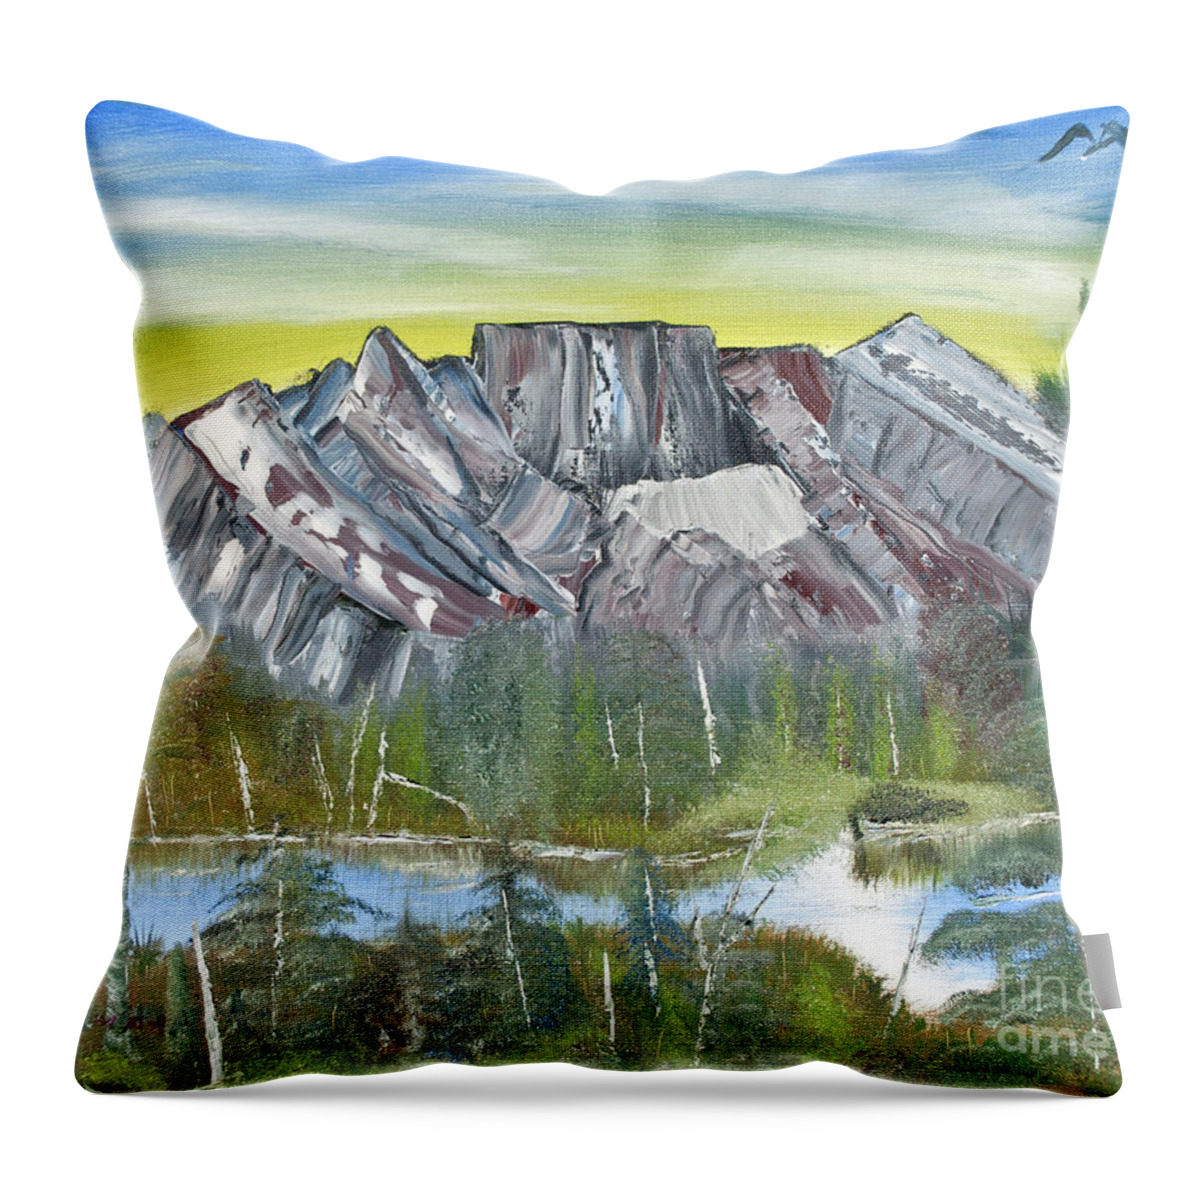 Oil On Canvas Throw Pillow featuring the painting Birch Mountains by Joseph Summa